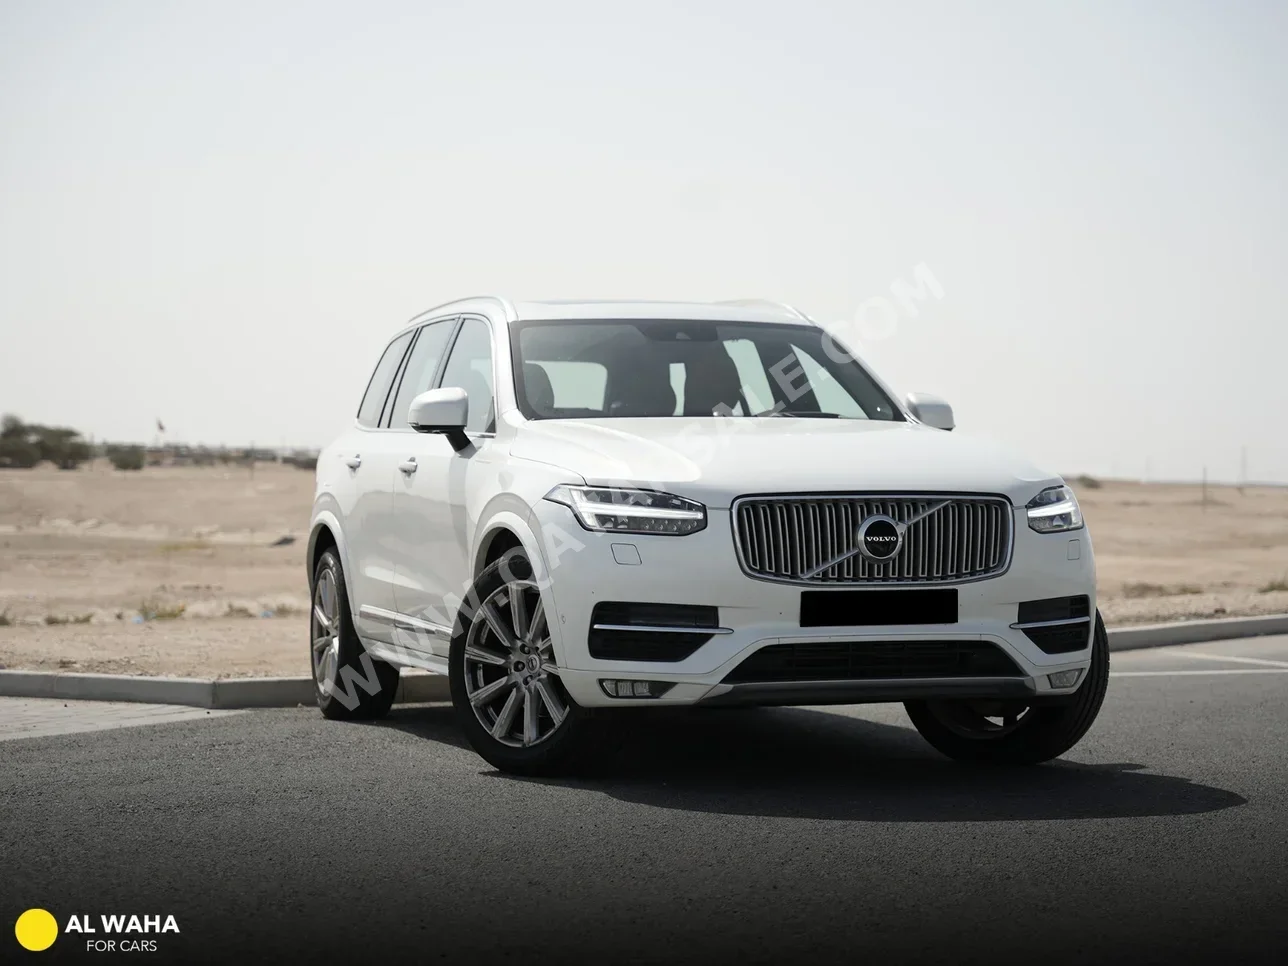 Volvo  XC  90  2019  Automatic  40,000 Km  4 Cylinder  Four Wheel Drive (4WD)  SUV  White